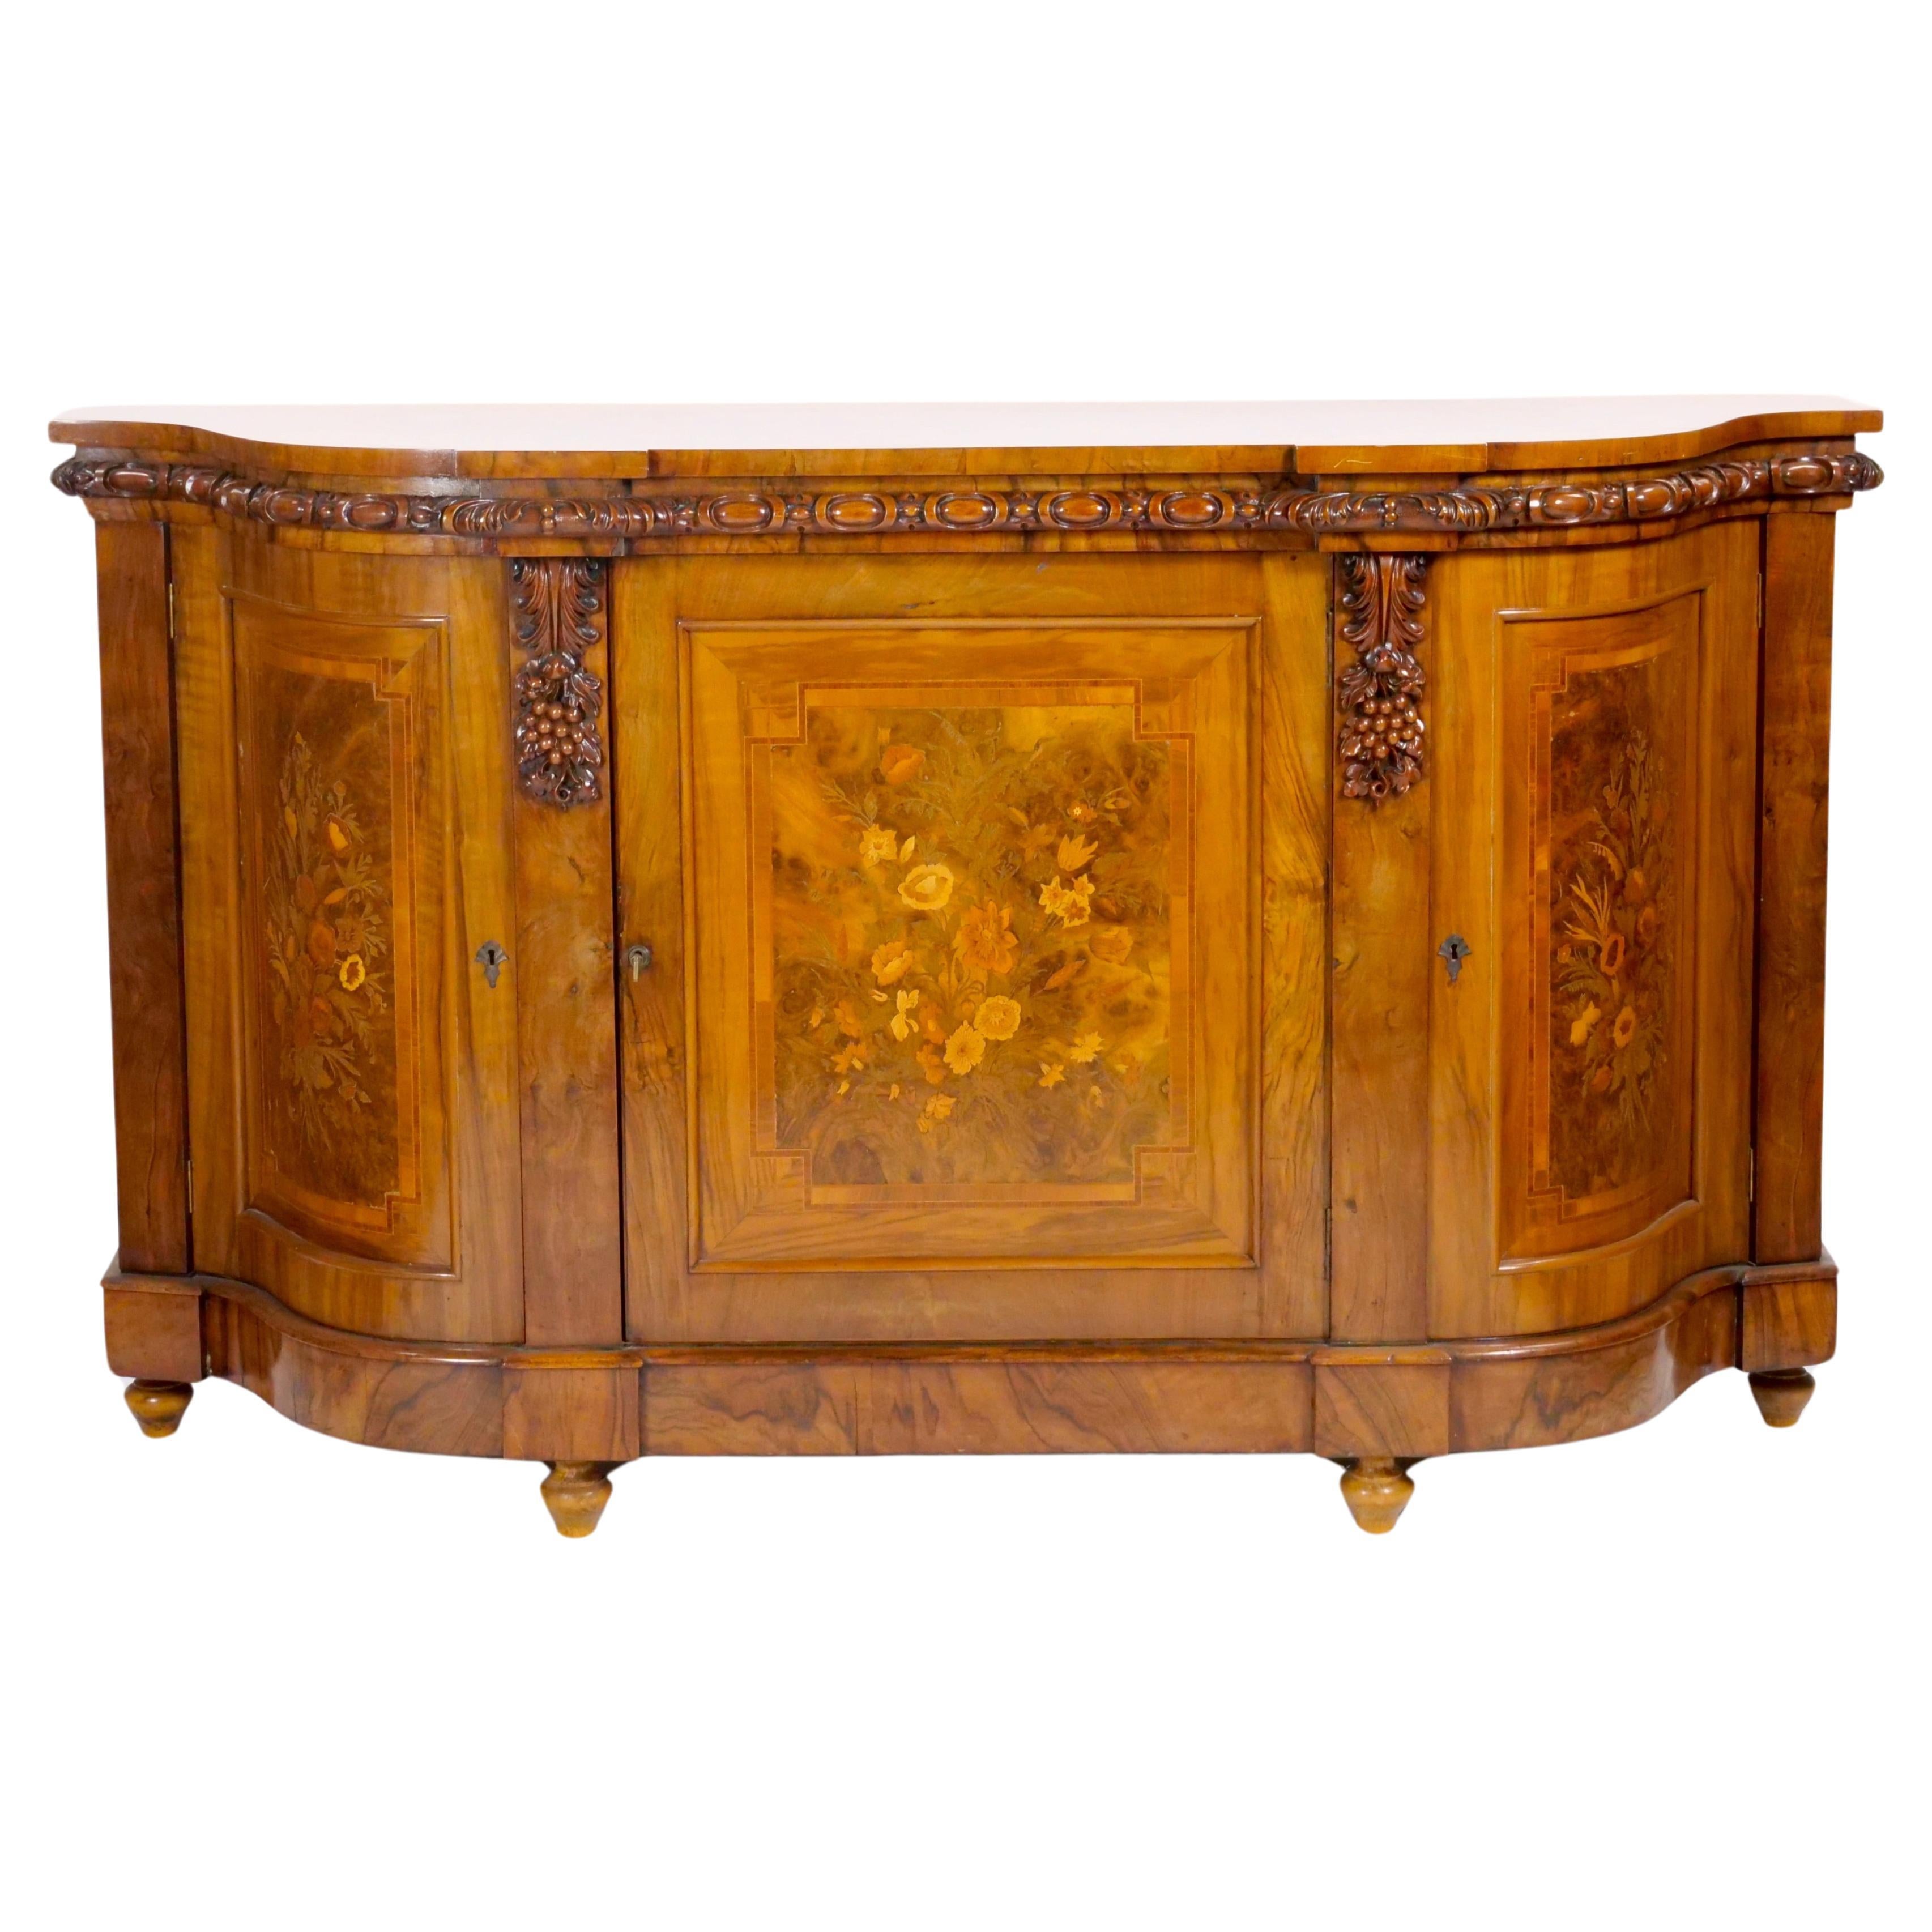 Early 19th Century English Victorian Style Walnut Marquetry Credenza / Sideboard